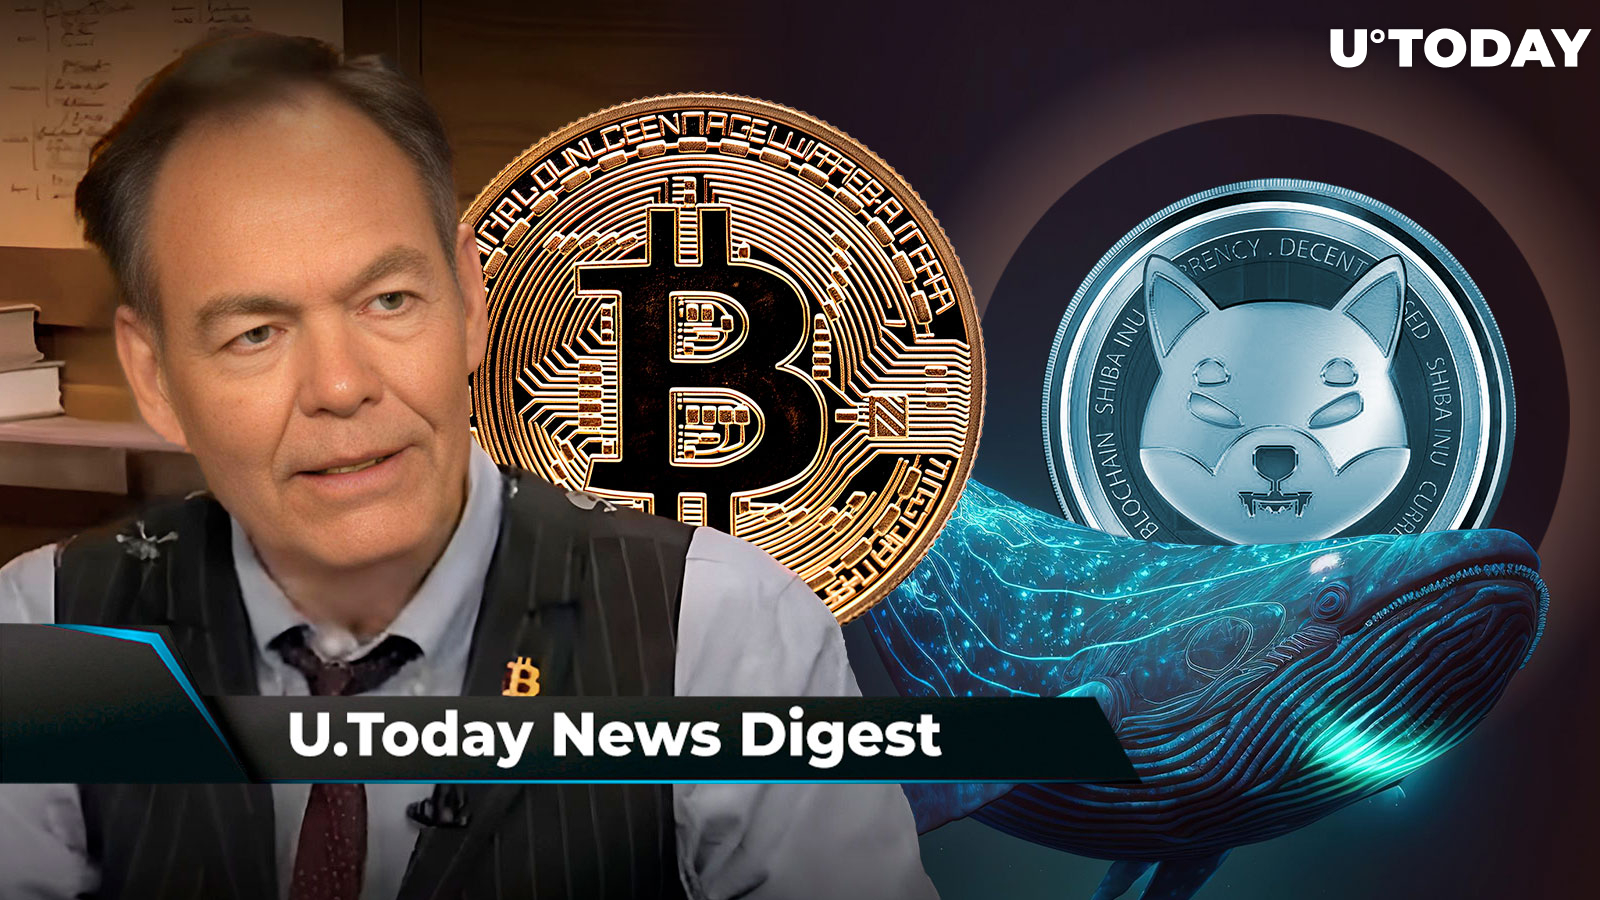 Coinbase Delists 80 Trading Pairs From Platform, Max Keiser Shares When BTC Will Hit $220,000, SHIB Whale Makes Massive $31.6 Million Transfer: Crypto News Digest by U.Today